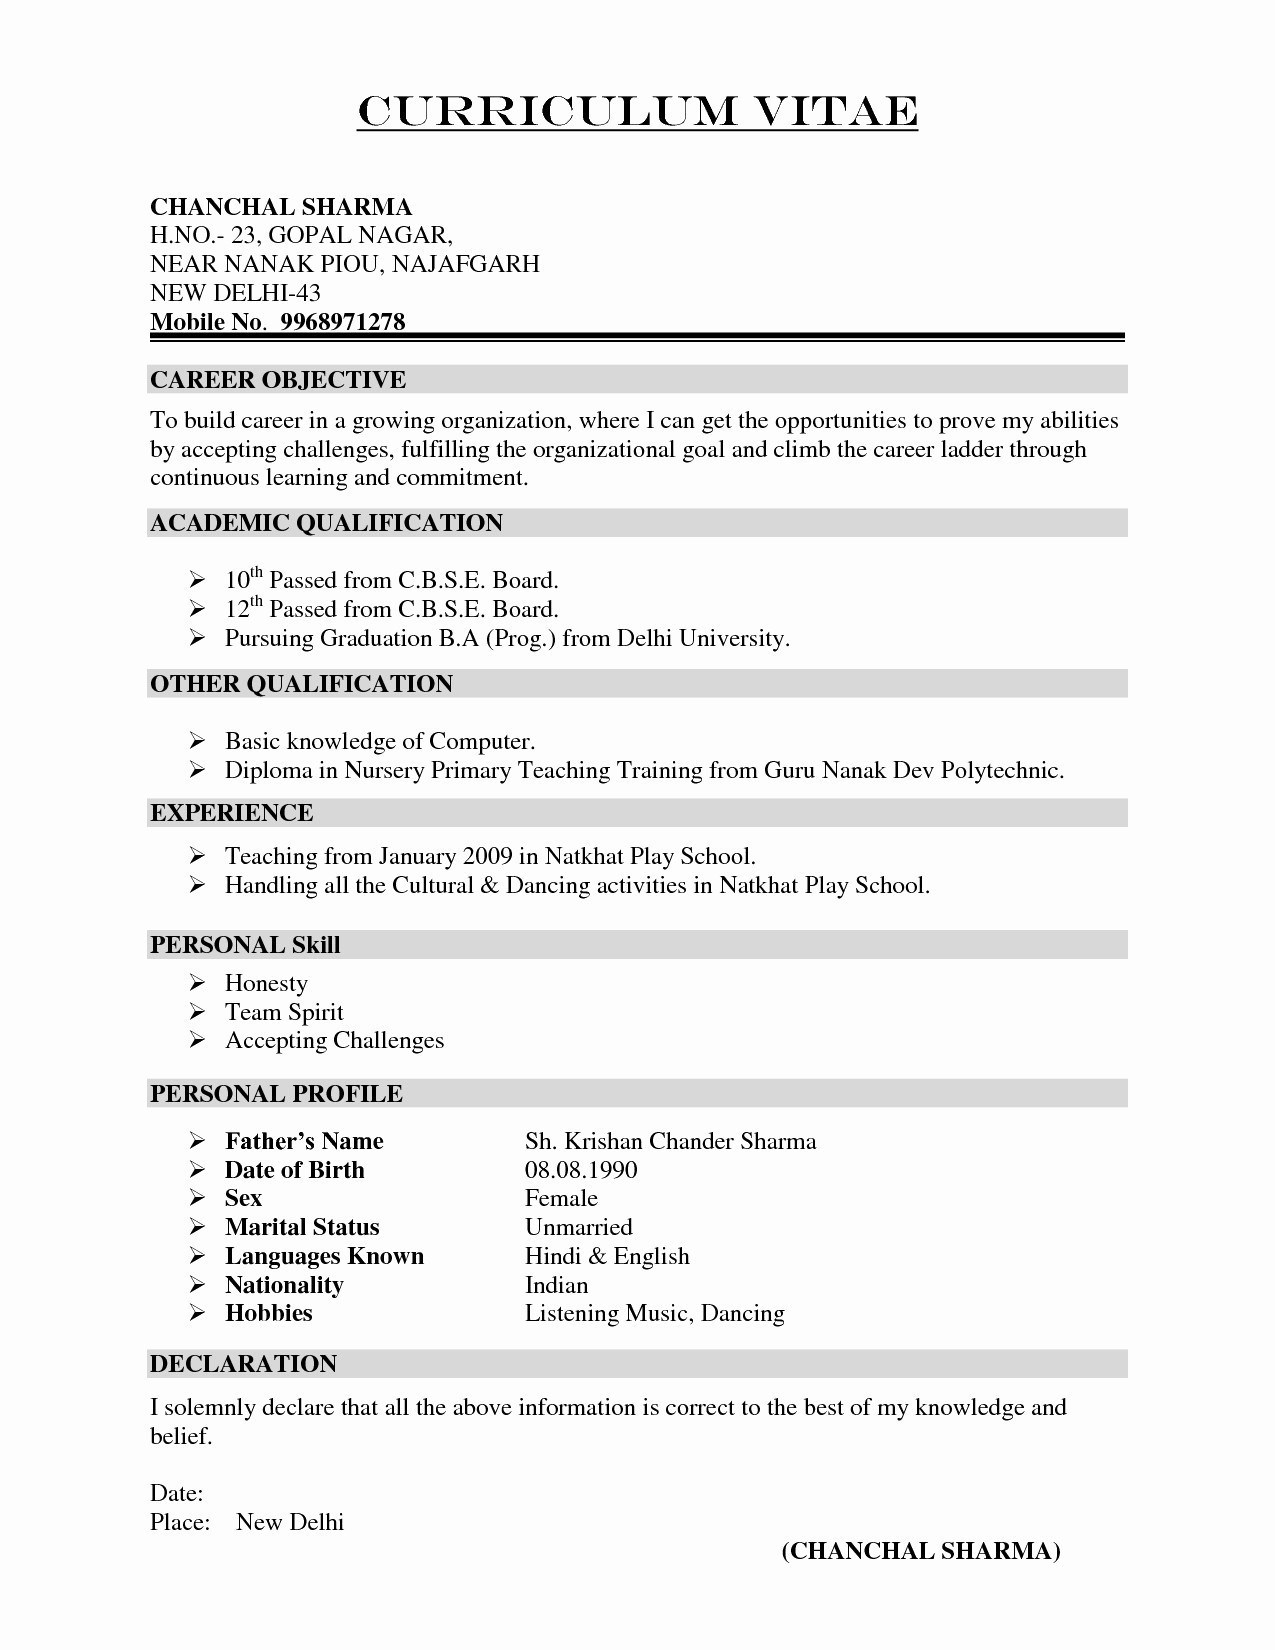 Reference Request Letter Template - Resumes for It Jobs Reference Sample Job Resume New New Resume Cover